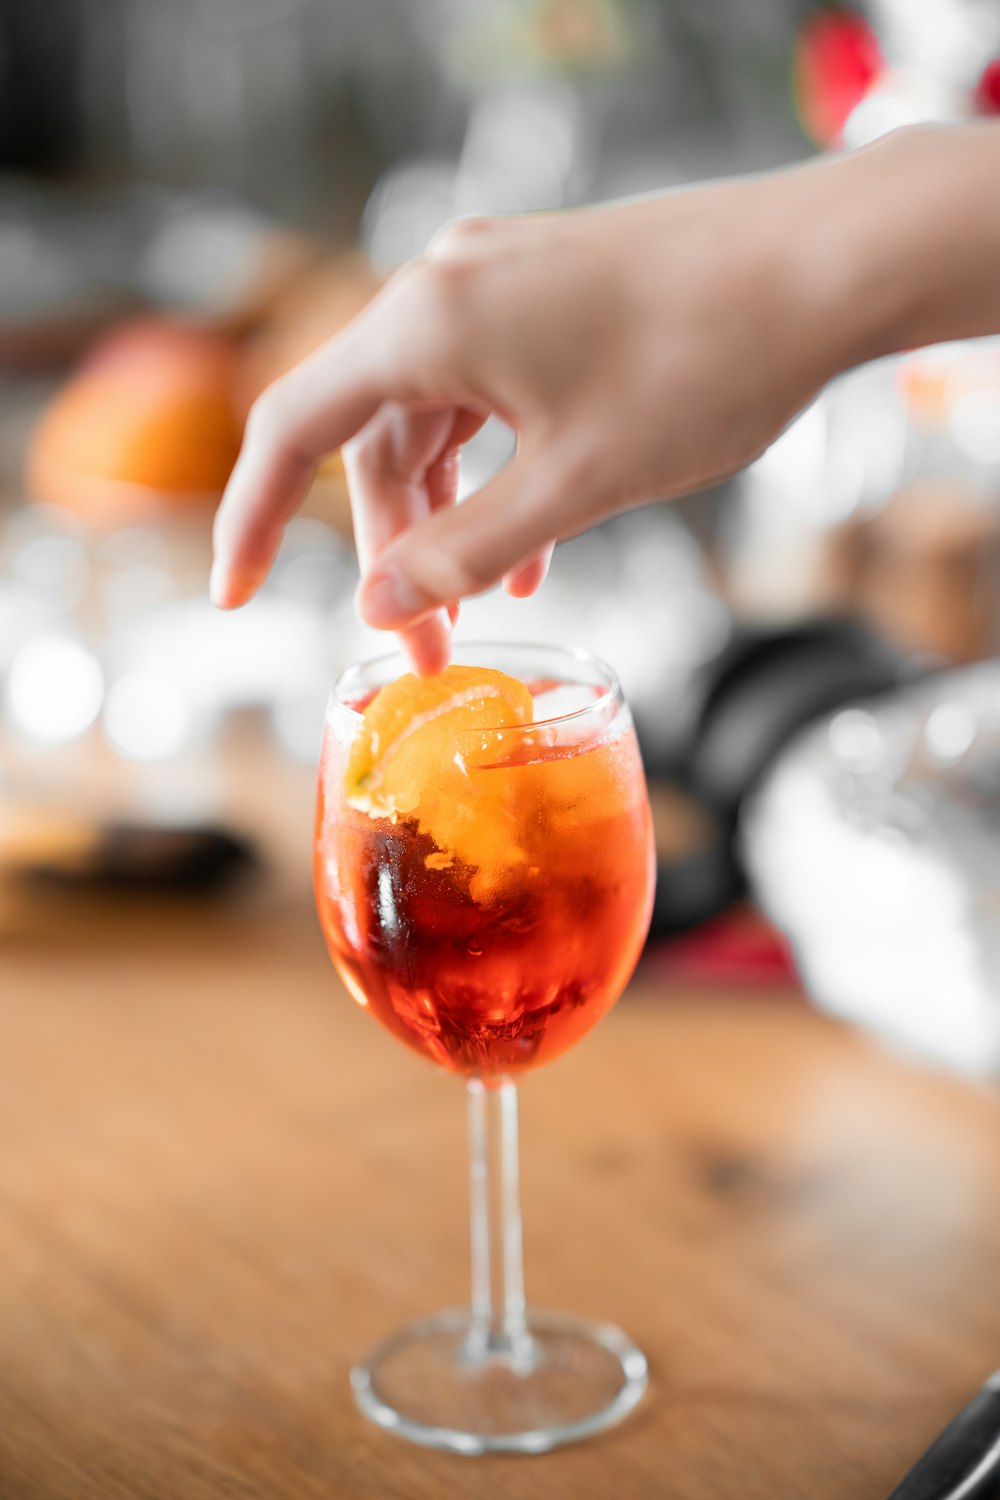 a person reaching for an orange in a wine glass